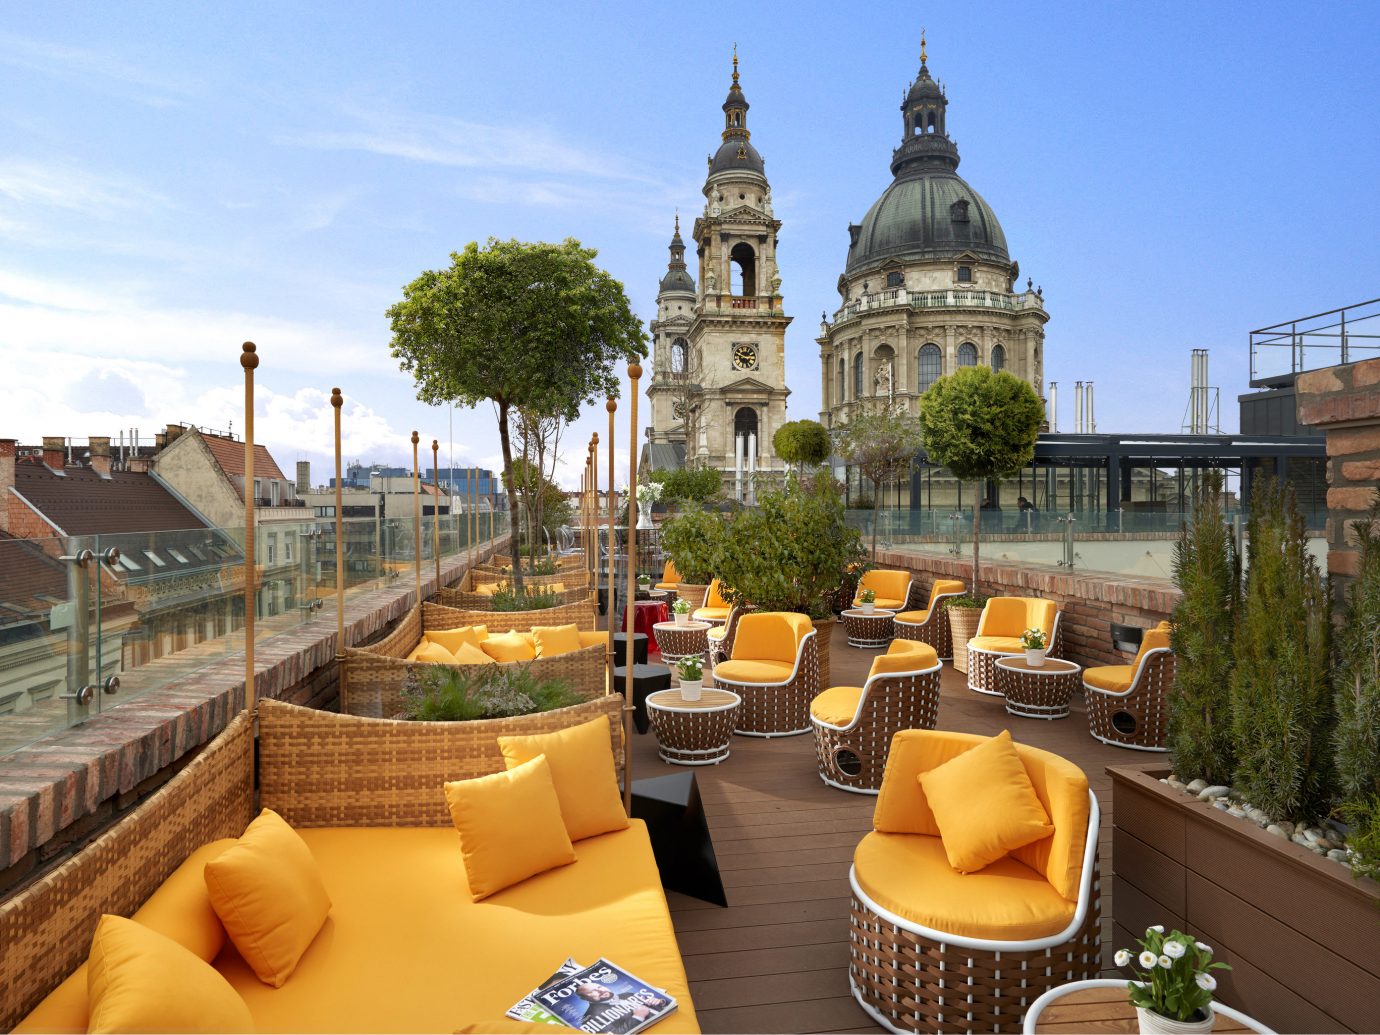 Budapest europe Hotels Hungary outdoor sky plaza palace estate tourism Resort Courtyard town square